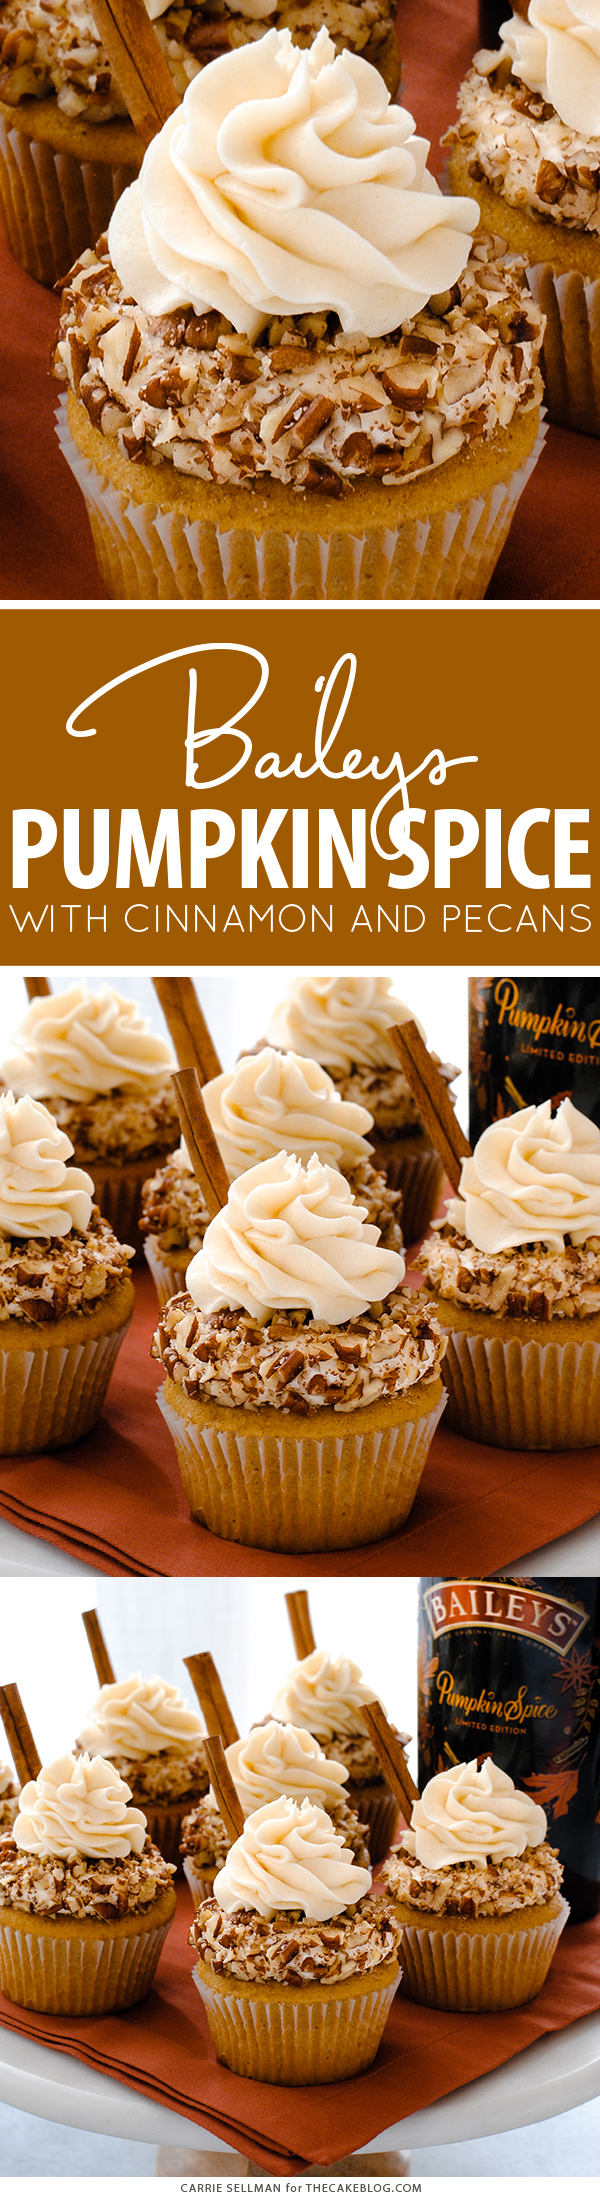 Bailey's Pumpkin Spice Cupcakes | by Carrie Sellman for TheCakeBlog.com